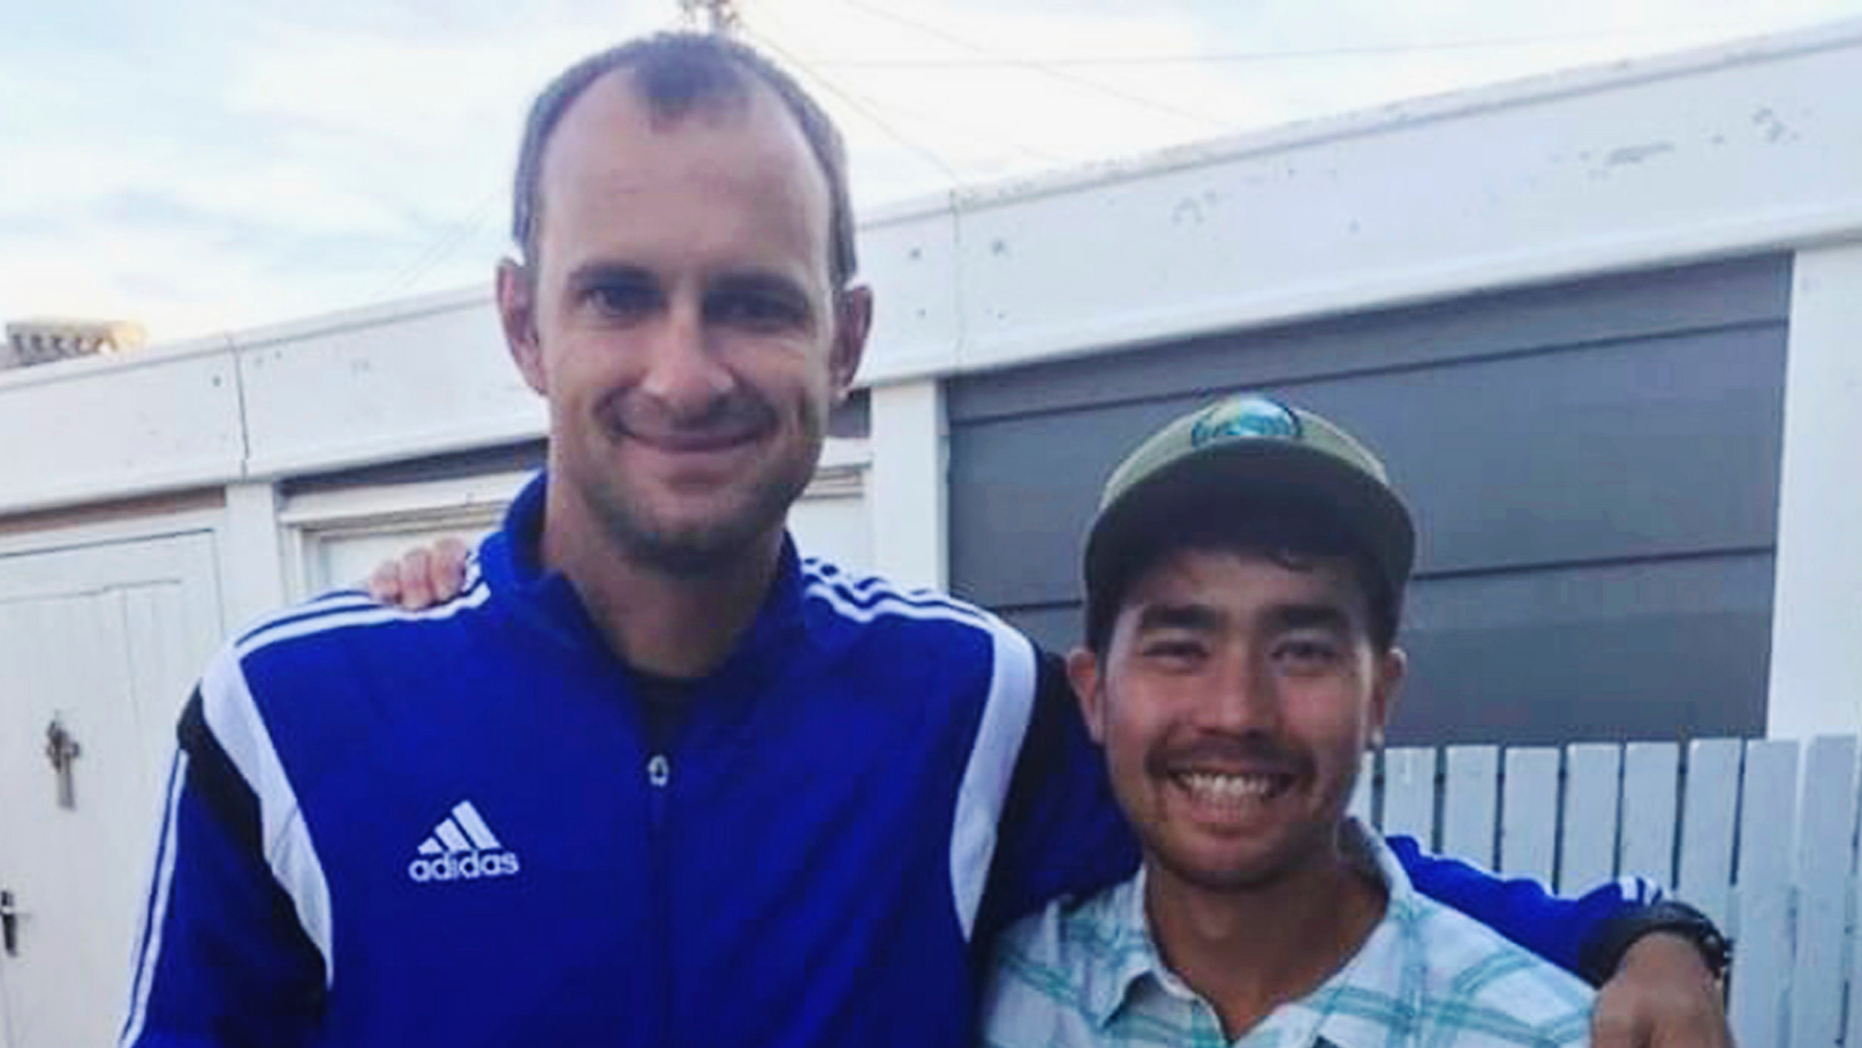 In this photo from October 2018, American adventurer John Allen Chau, on the right, represents a photo with Ubuntu Football Academy founder, Casey Prince, 39, in Cape Town, South Africa, a few days before leaving for an isolated Indian island of North Sentinel Island. where he was killed. Chau, who kayaked on the isolated island populated by a tribe known to have fired on aliens with bows and arrows, was killed, police said Wednesday, Nov. 21. Officials said they were working with anthropologists to recover the body. (AP Photo / Sarah Prince)